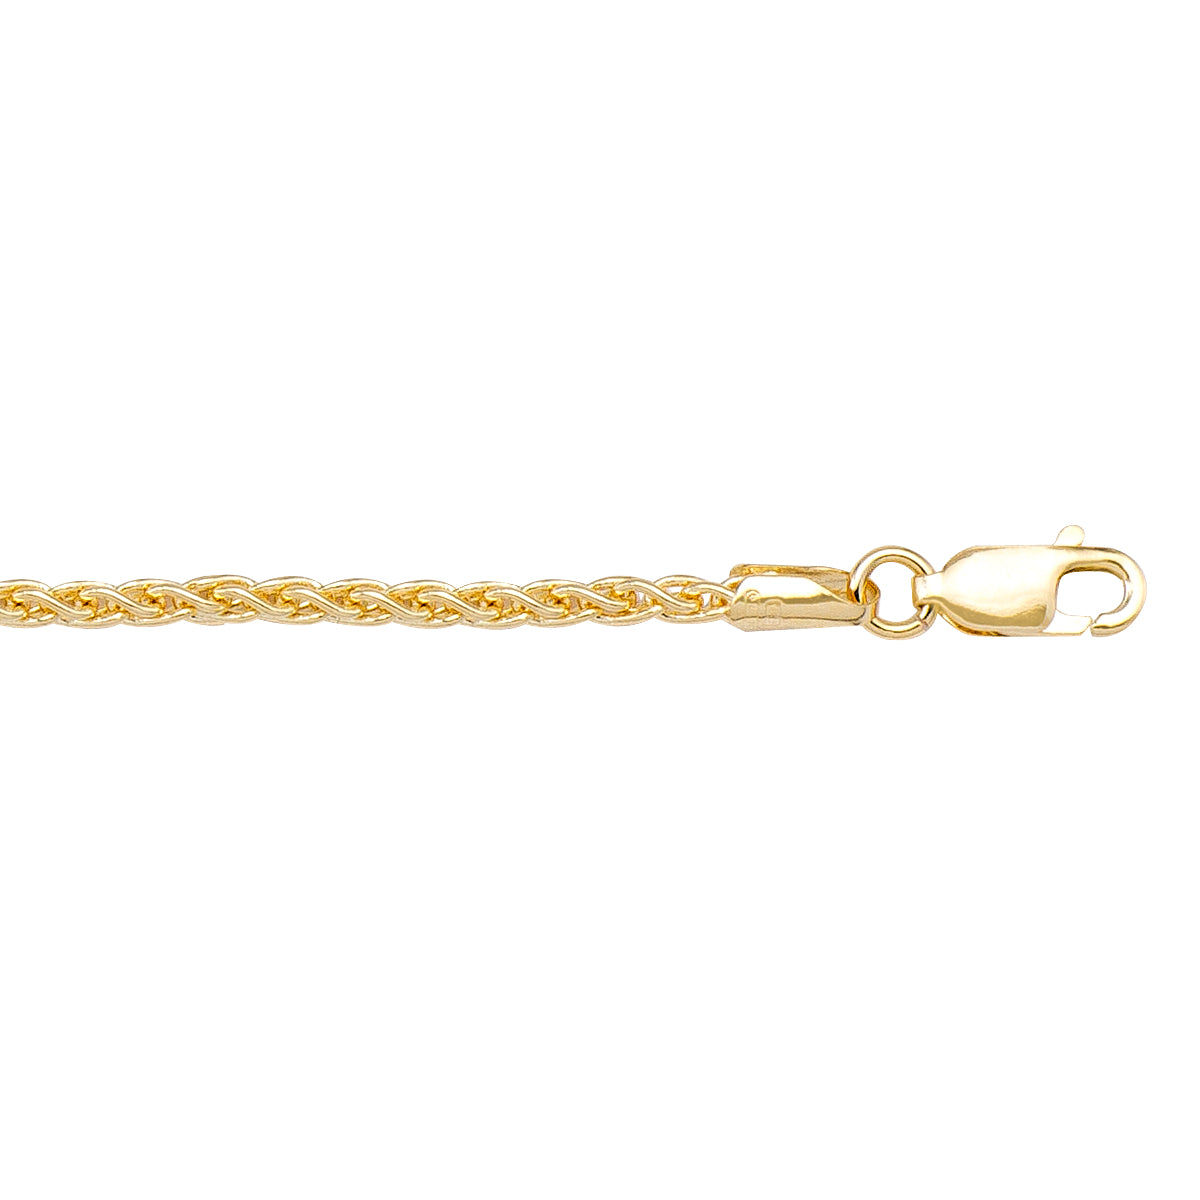 GOLD CHAIN YELLOW GOLD SOLID ROUND WHEAT LINK 